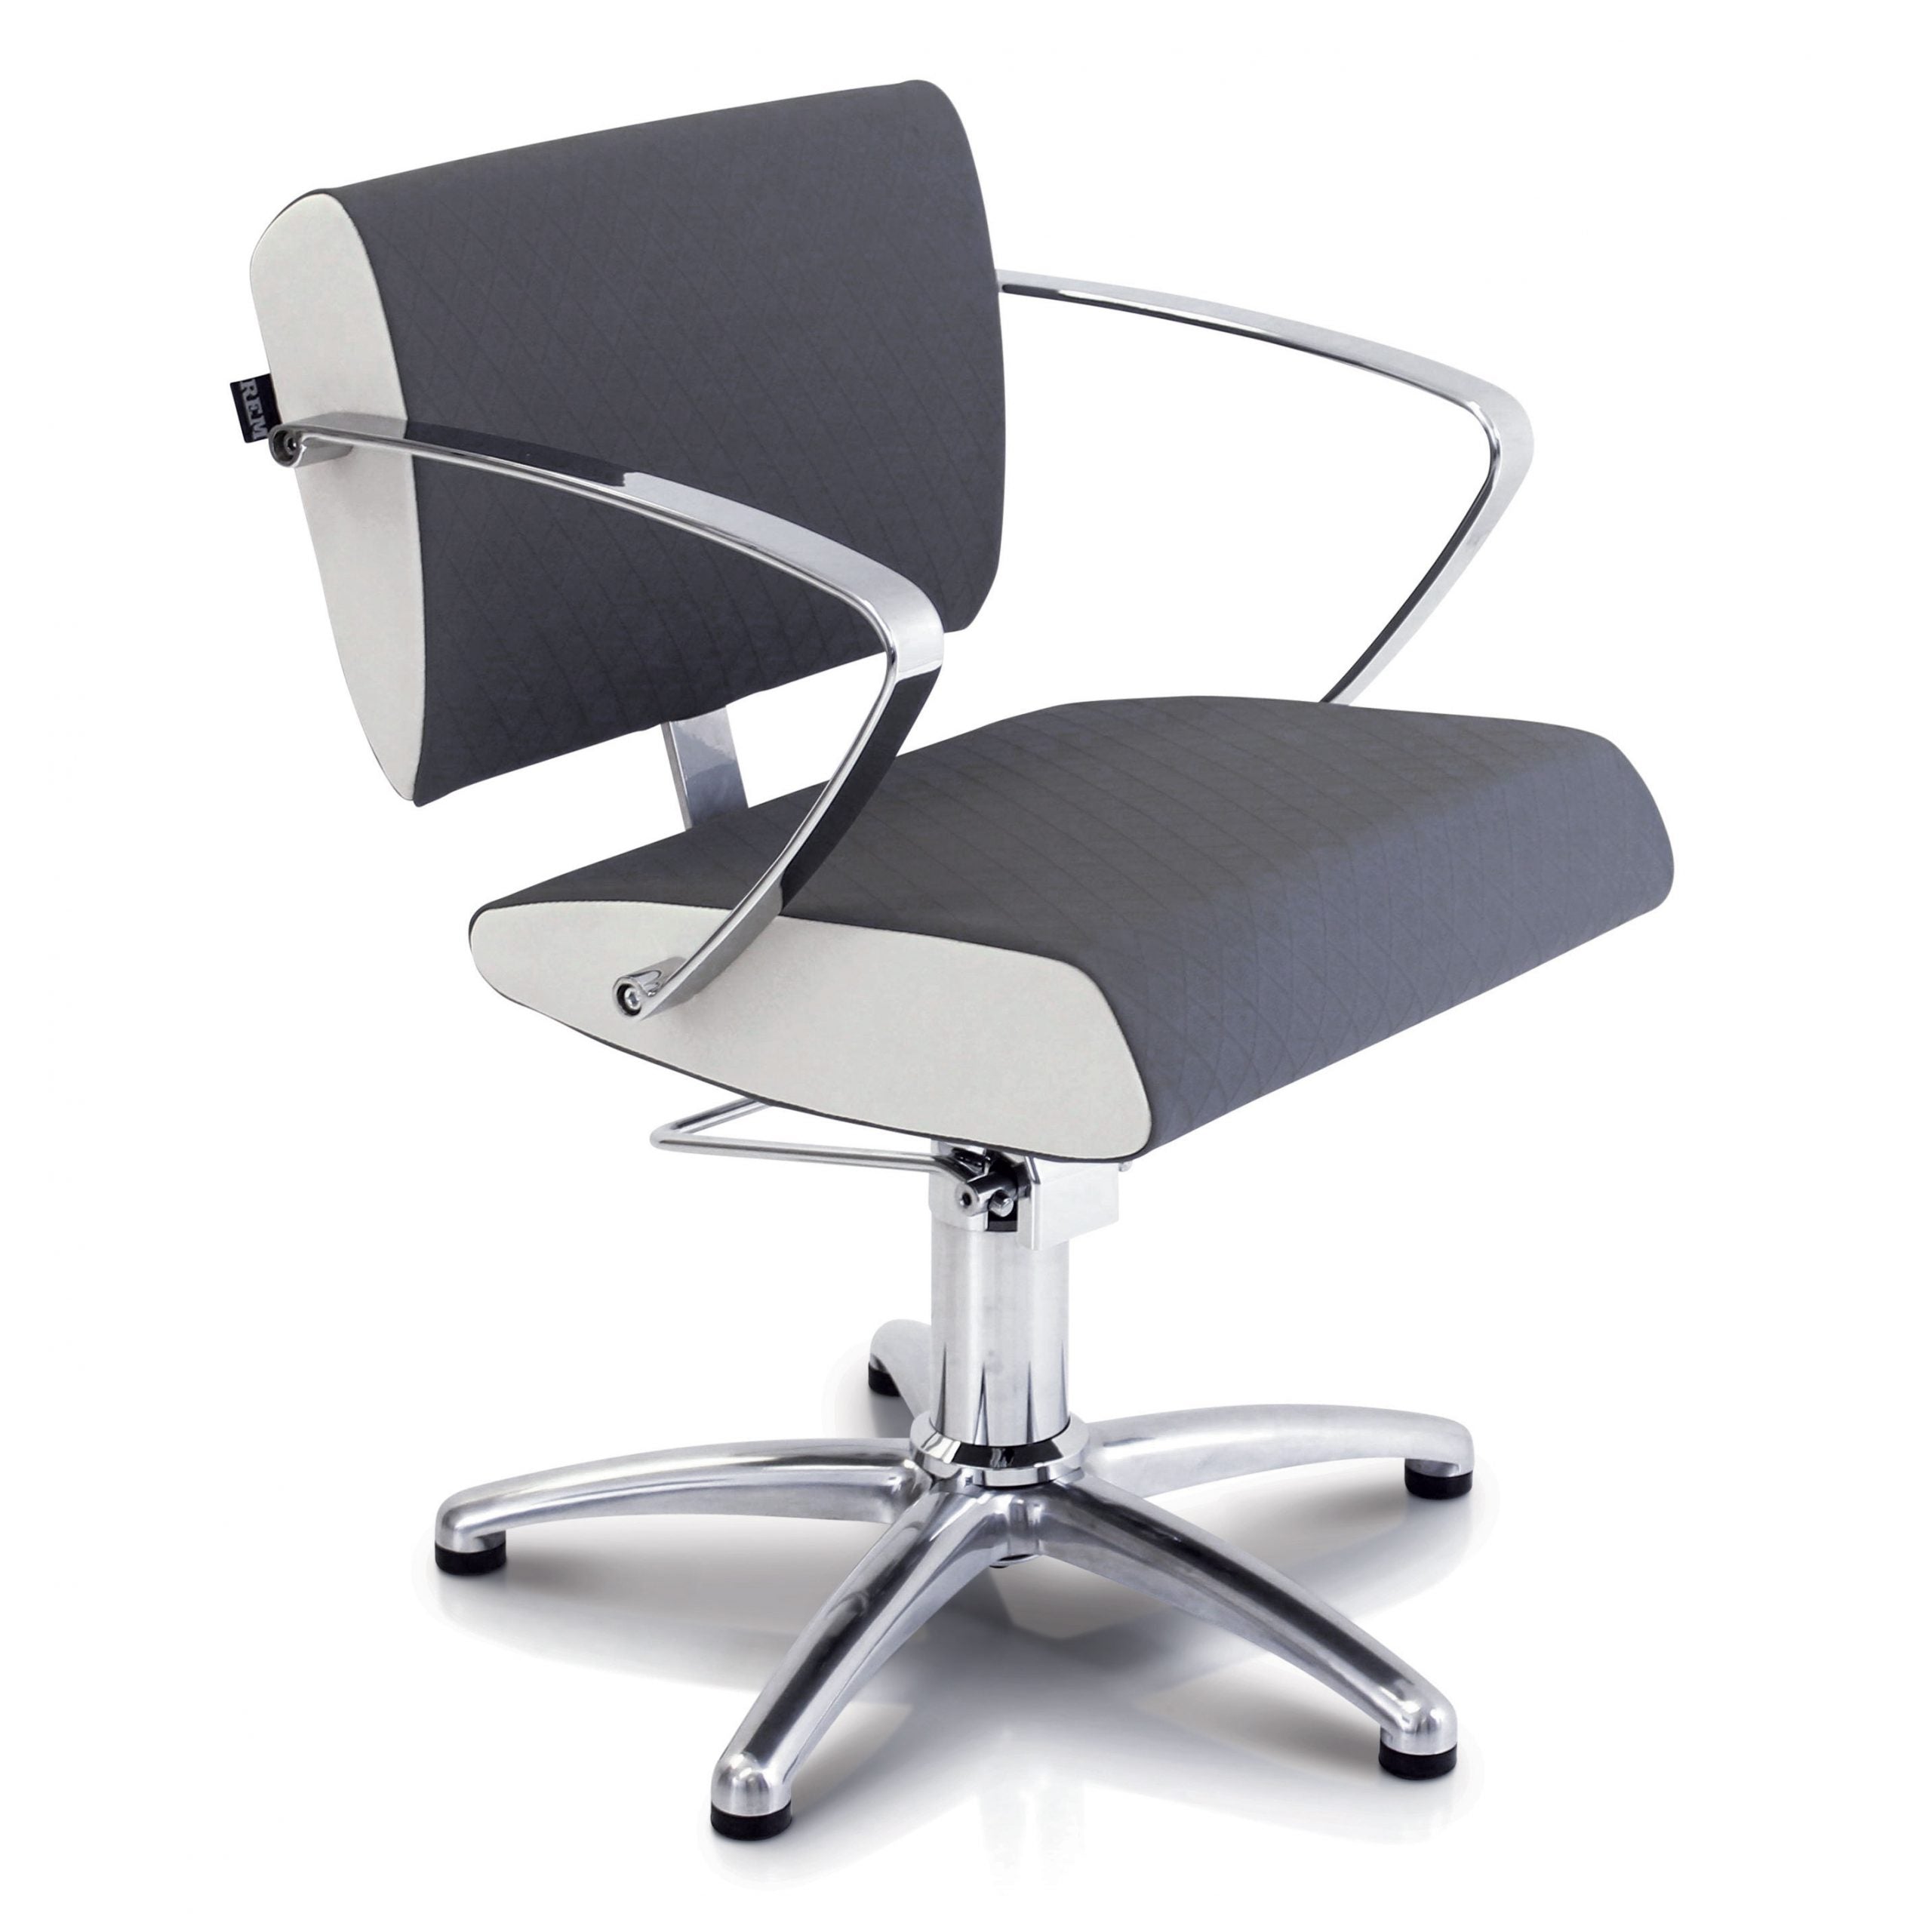 Salon Chairs for customer comfort now available through us. Select and order in advance directly to your shop.